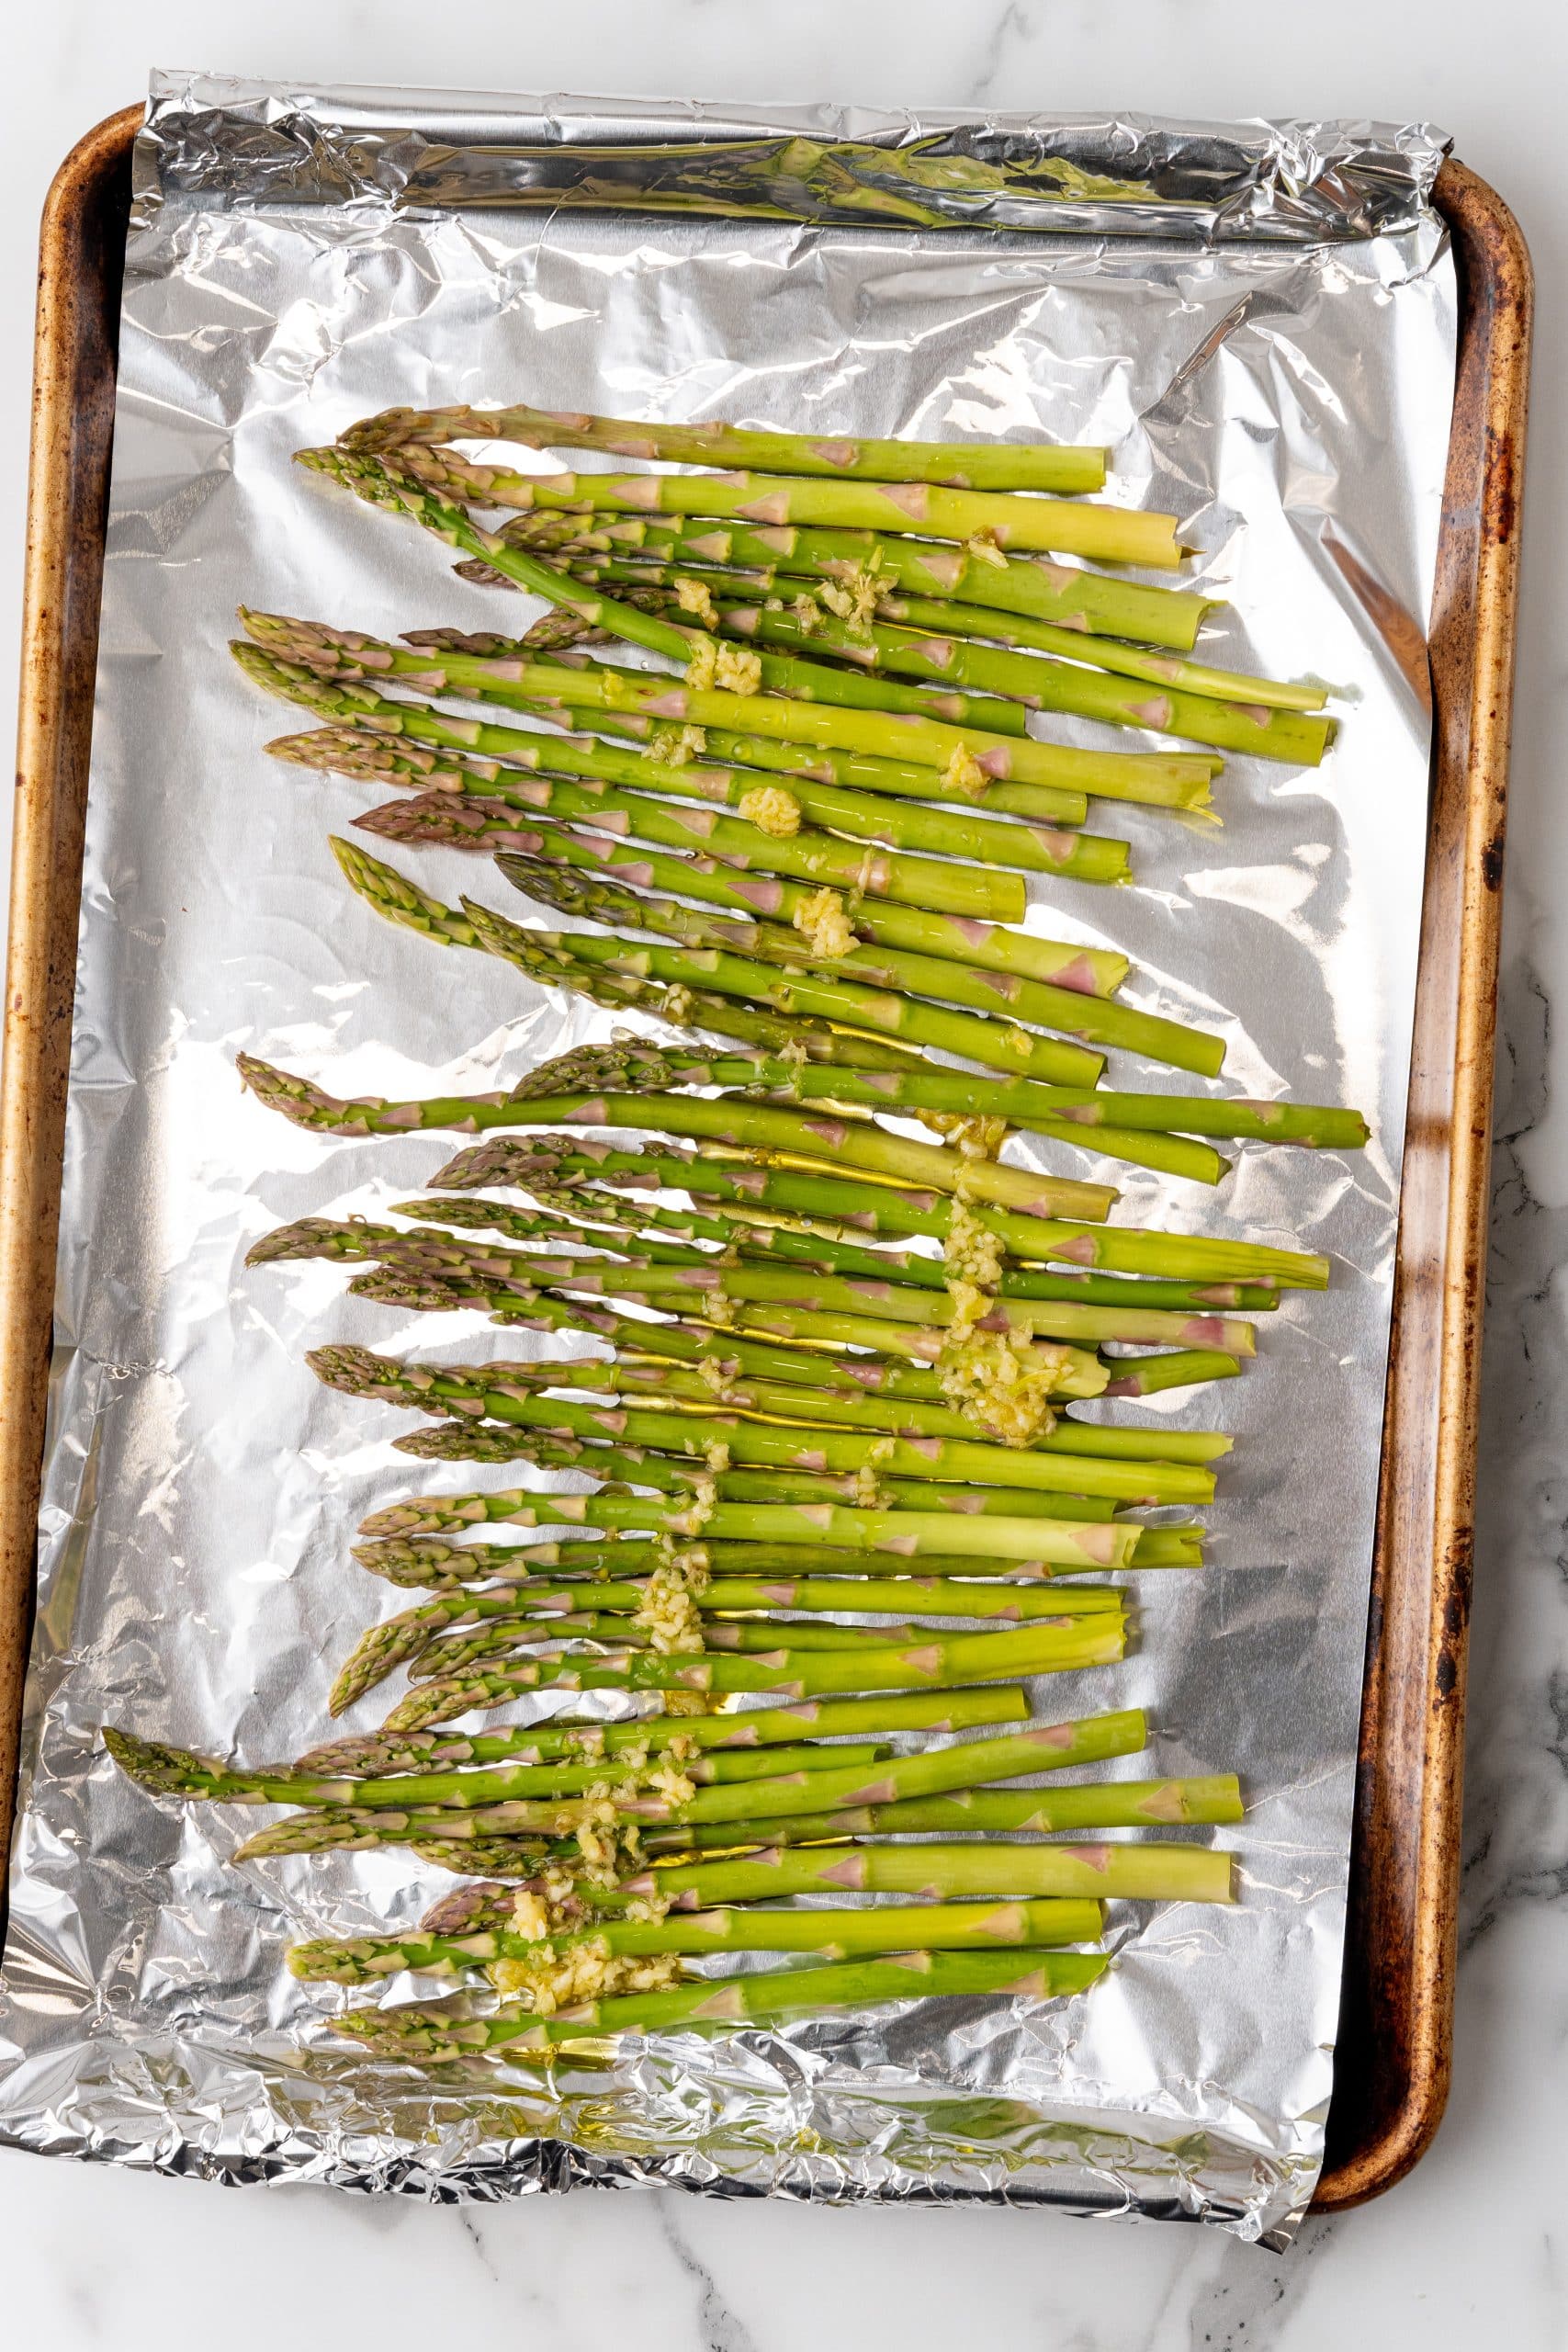 stalks of asparagus topped with minced garlic arranged in a single row on a foil lined sheet pan